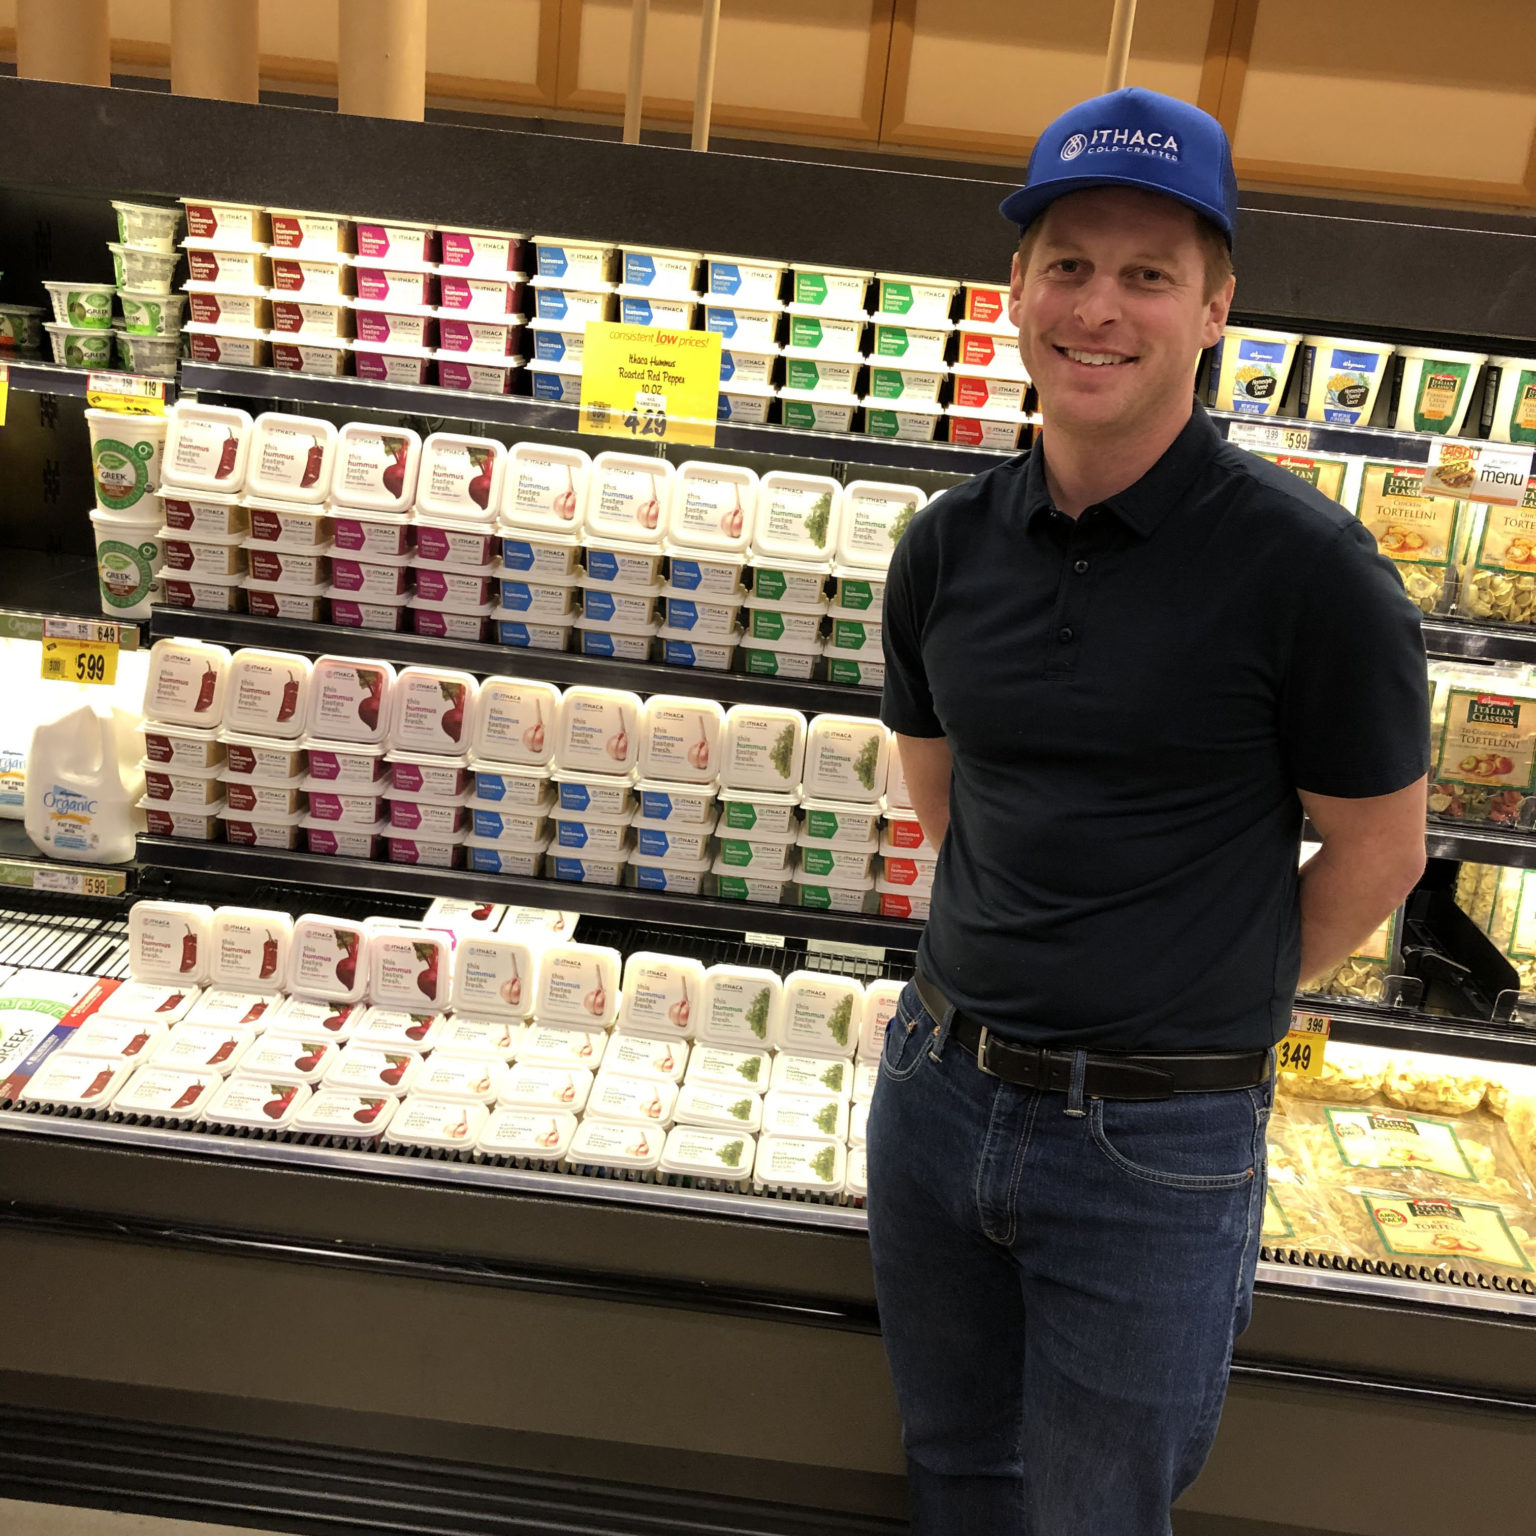 Chris Kirby, founder and CEO of Ithaca Hummus, stands in front of a display in a Wegmans grocery store